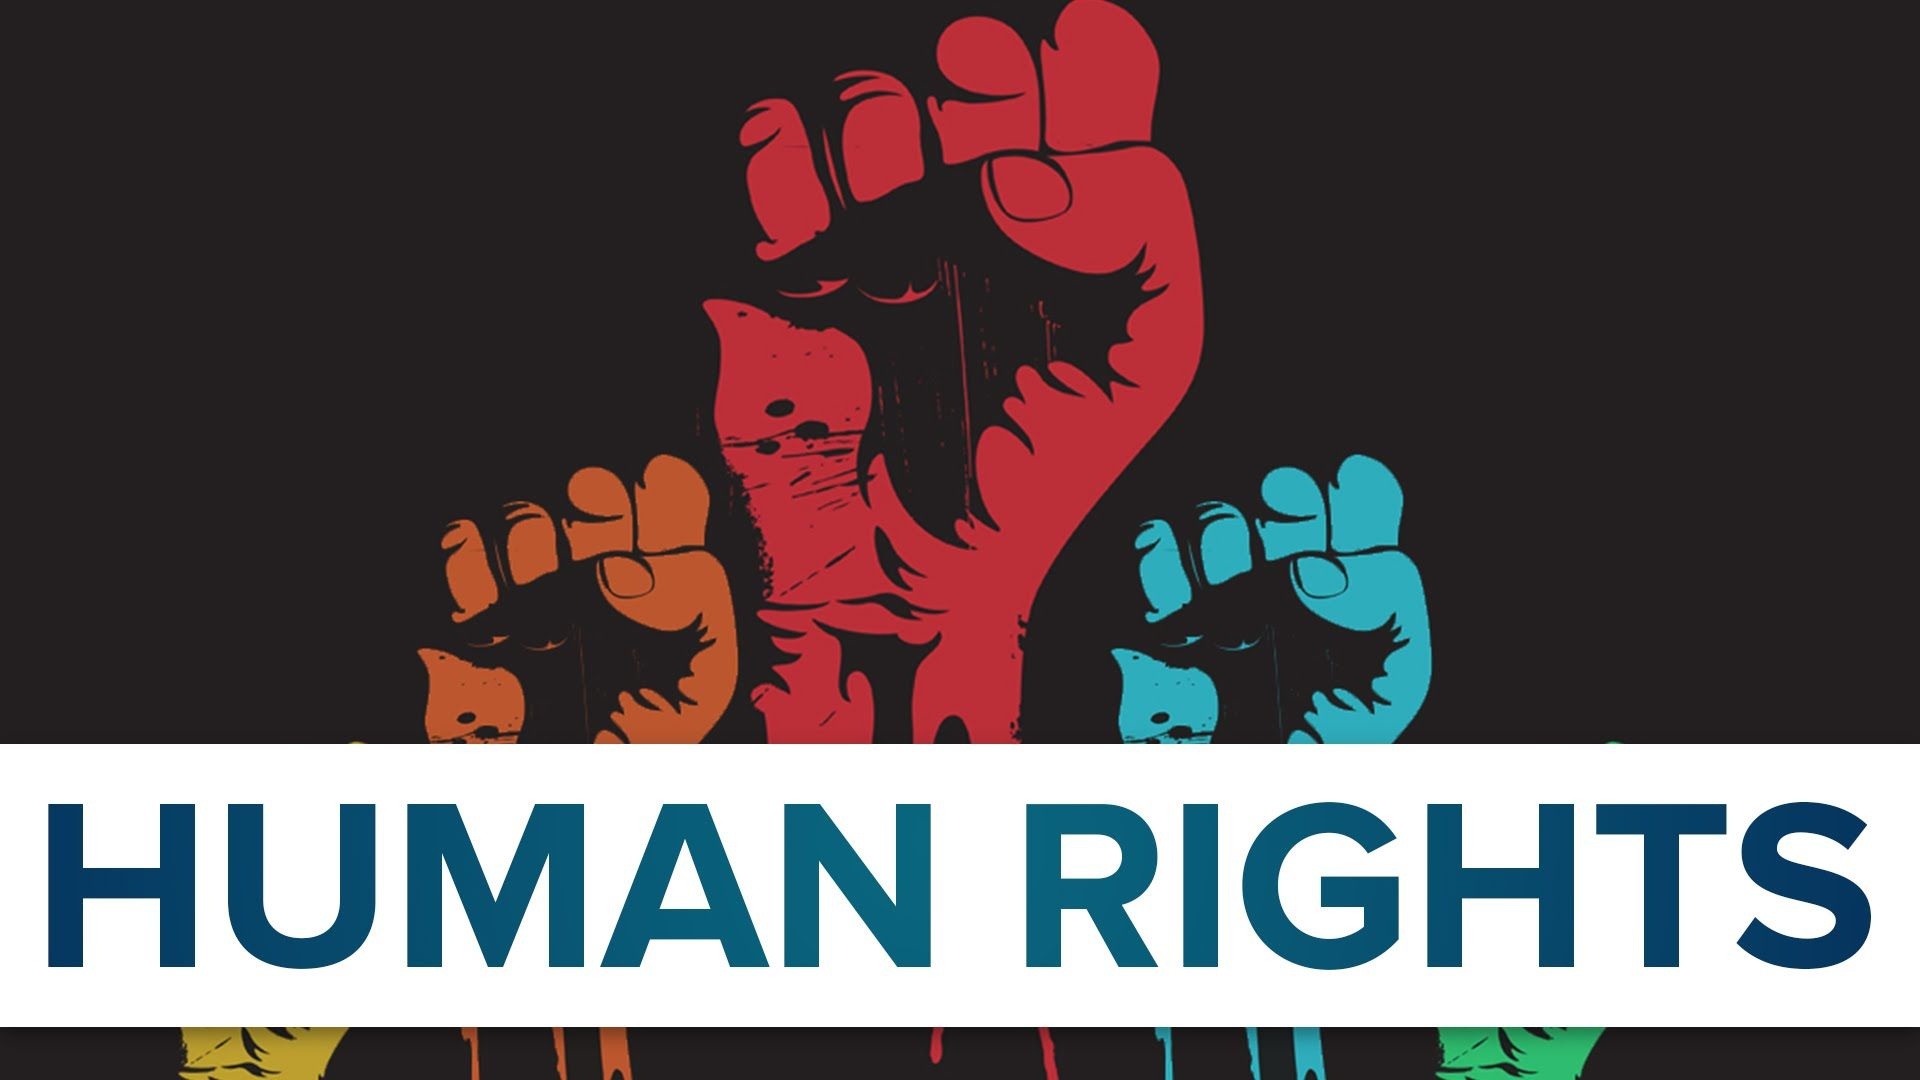 Human Rights Wallpapers, Top Free Backgrounds, 1920x1080 Full HD Desktop